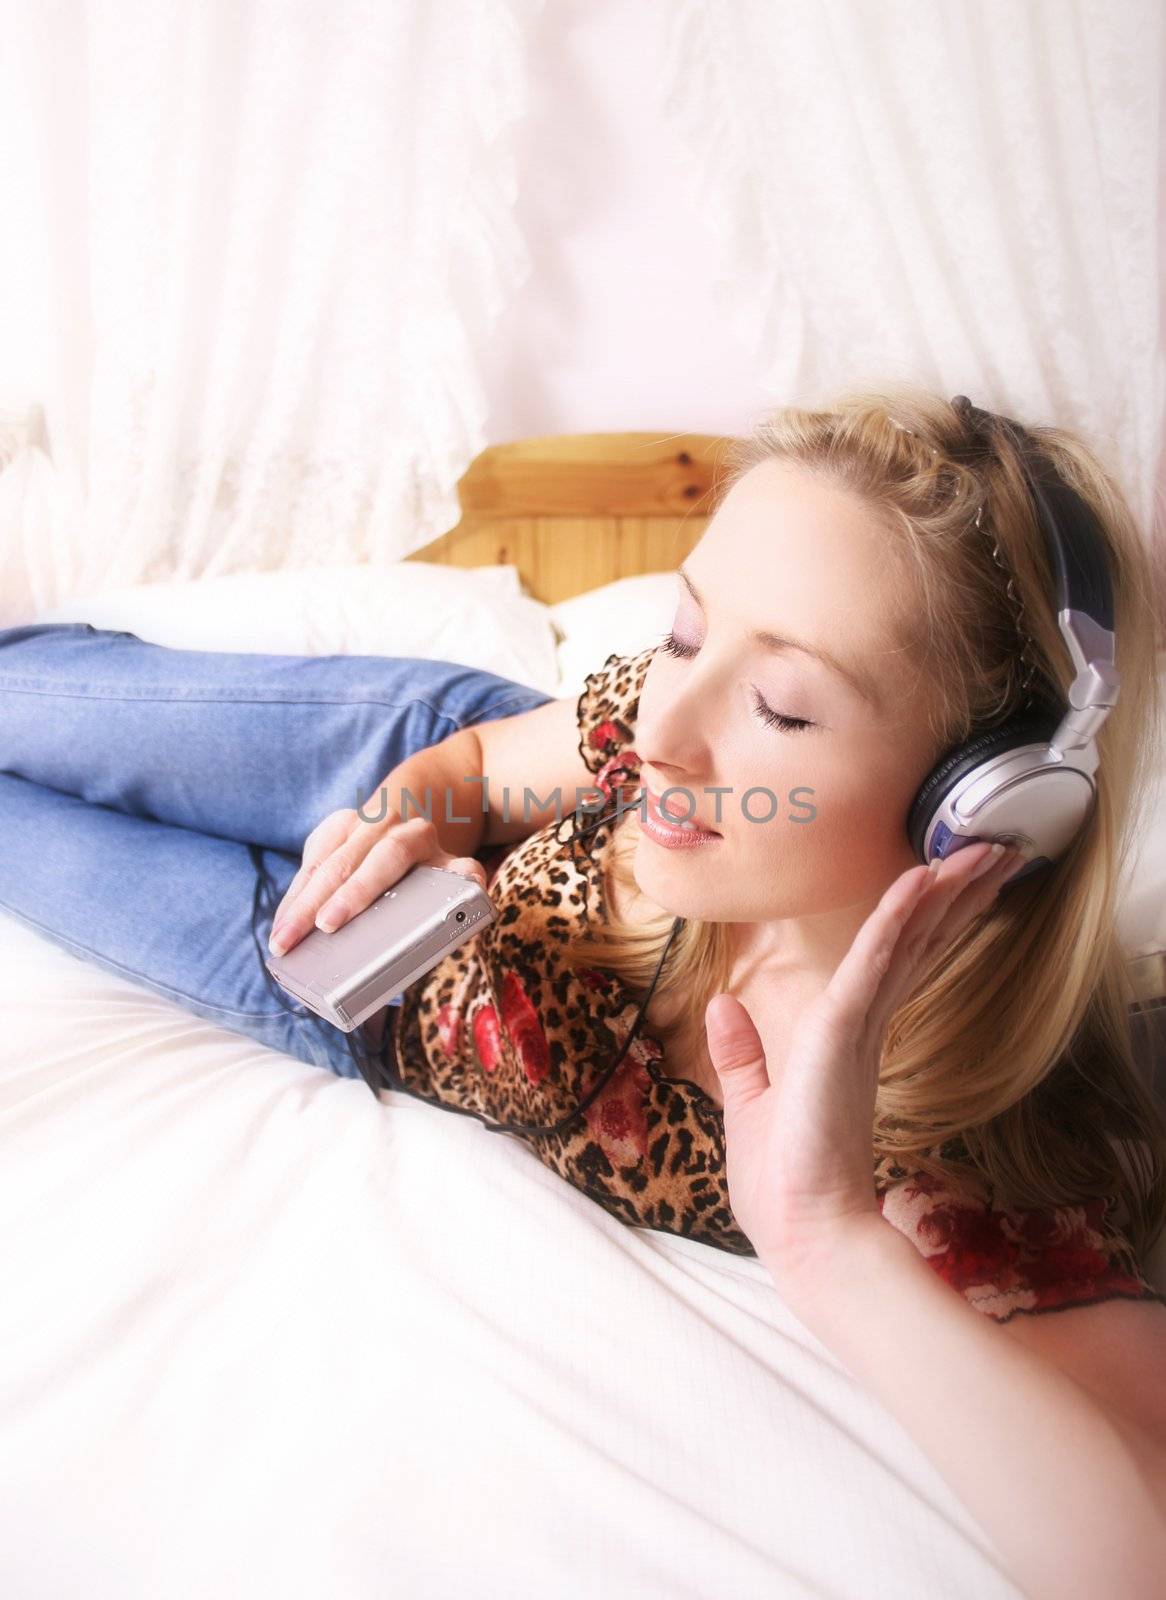 Relaxing to music at home by lovleah